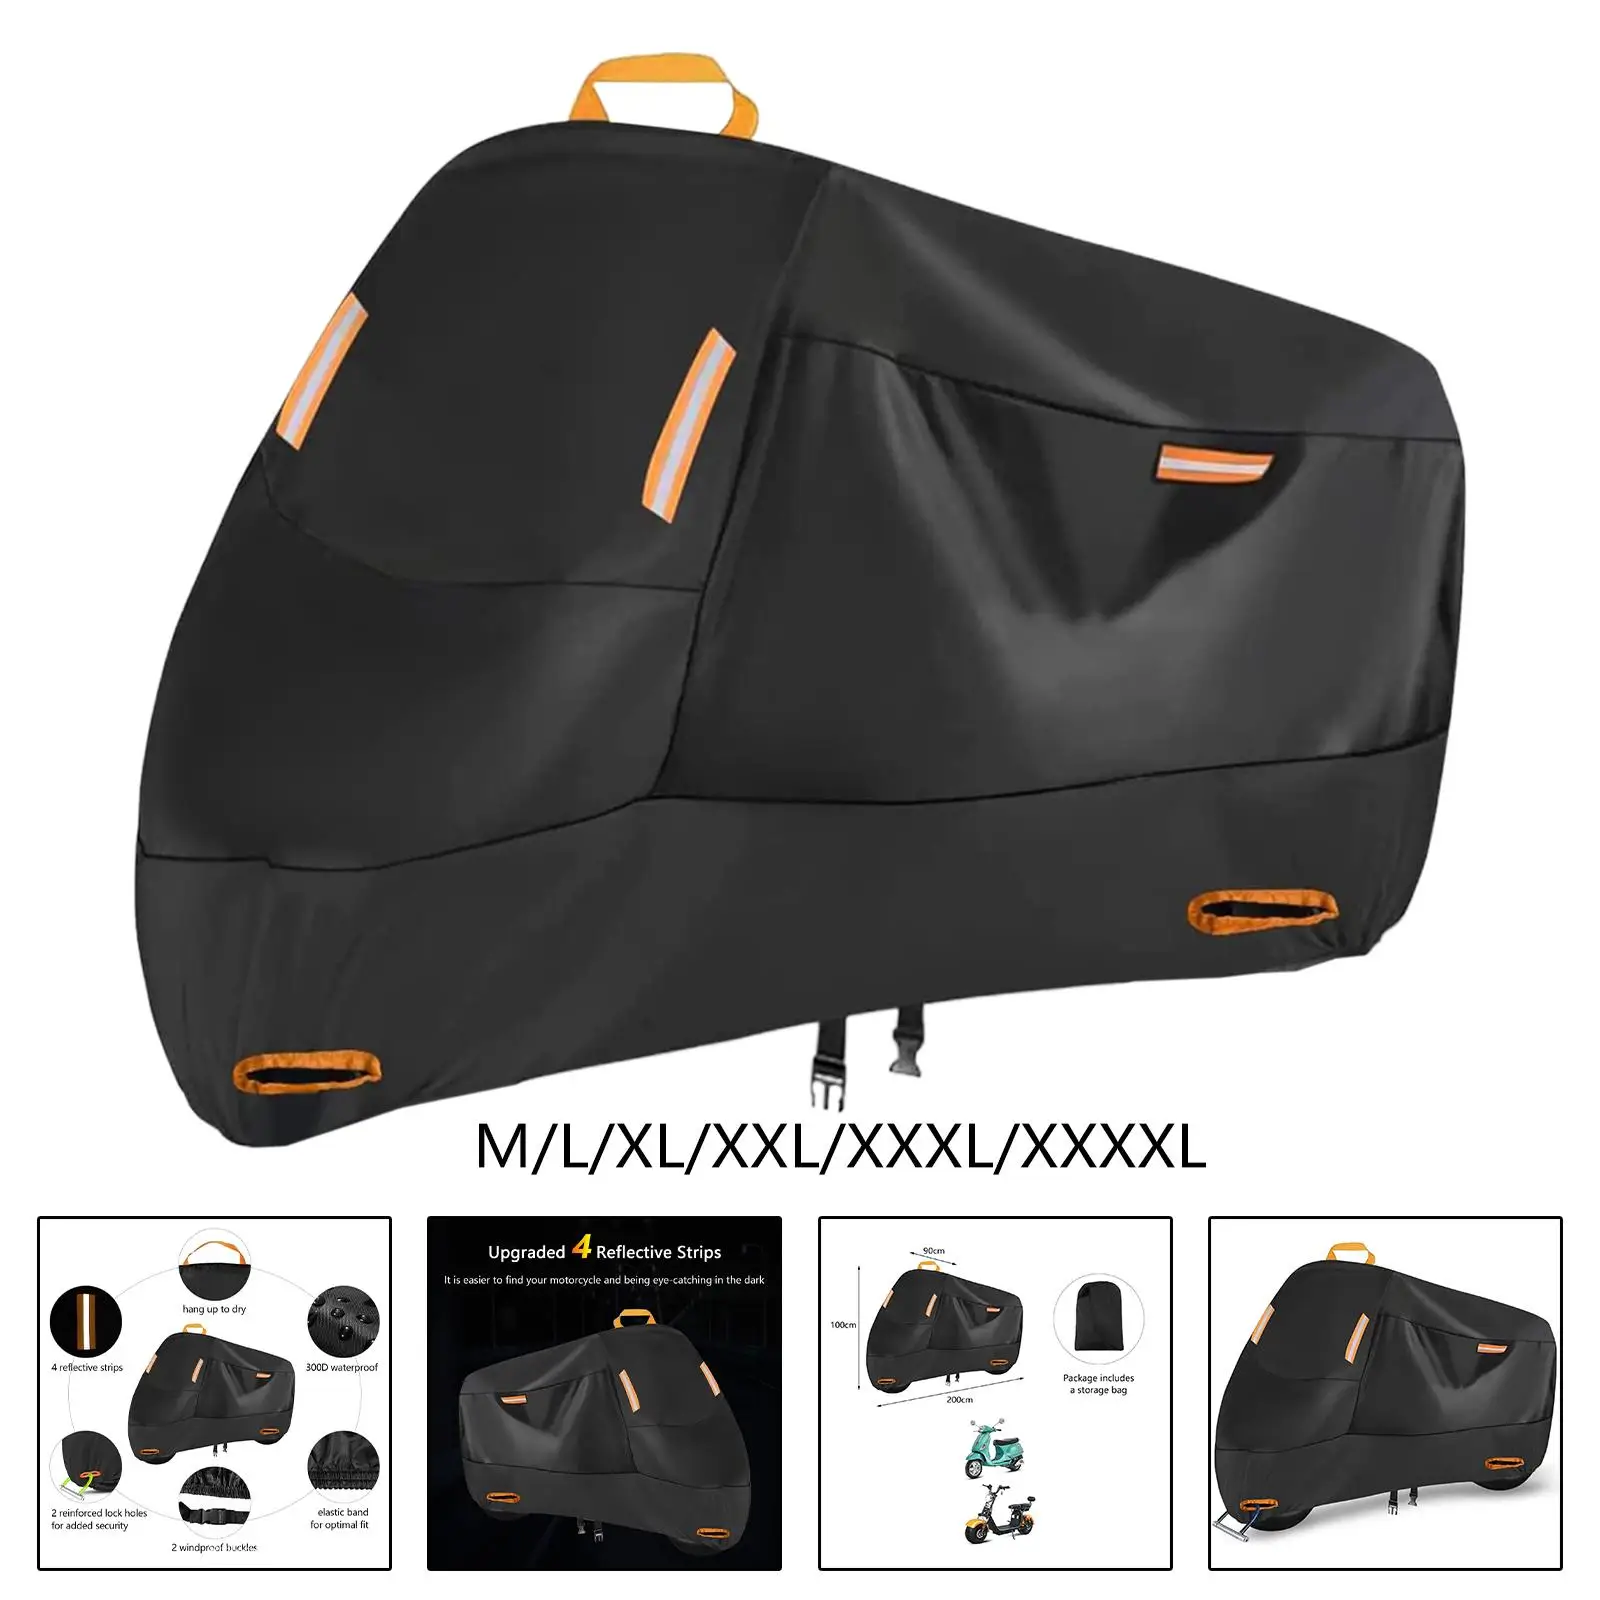 Motorcycle Cover Dustproof with 4 Reflective Strips Scooter Cover Motorbike Cover for Bike Motorbike Outdoor Protection